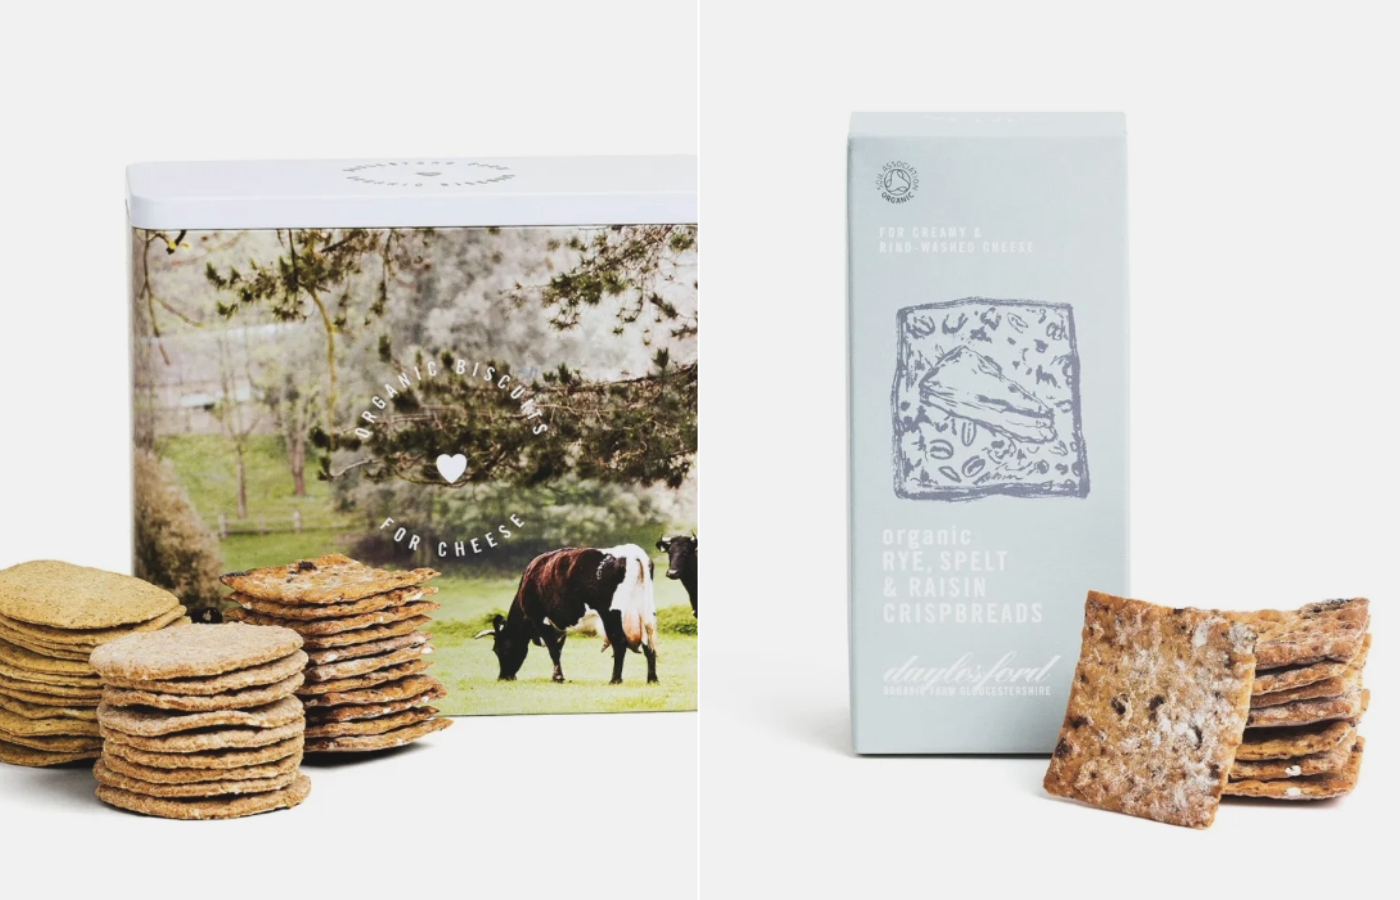 Daylesford Organic biscuits and crispbreads have been recalled. Photo: Daylesford Organic.